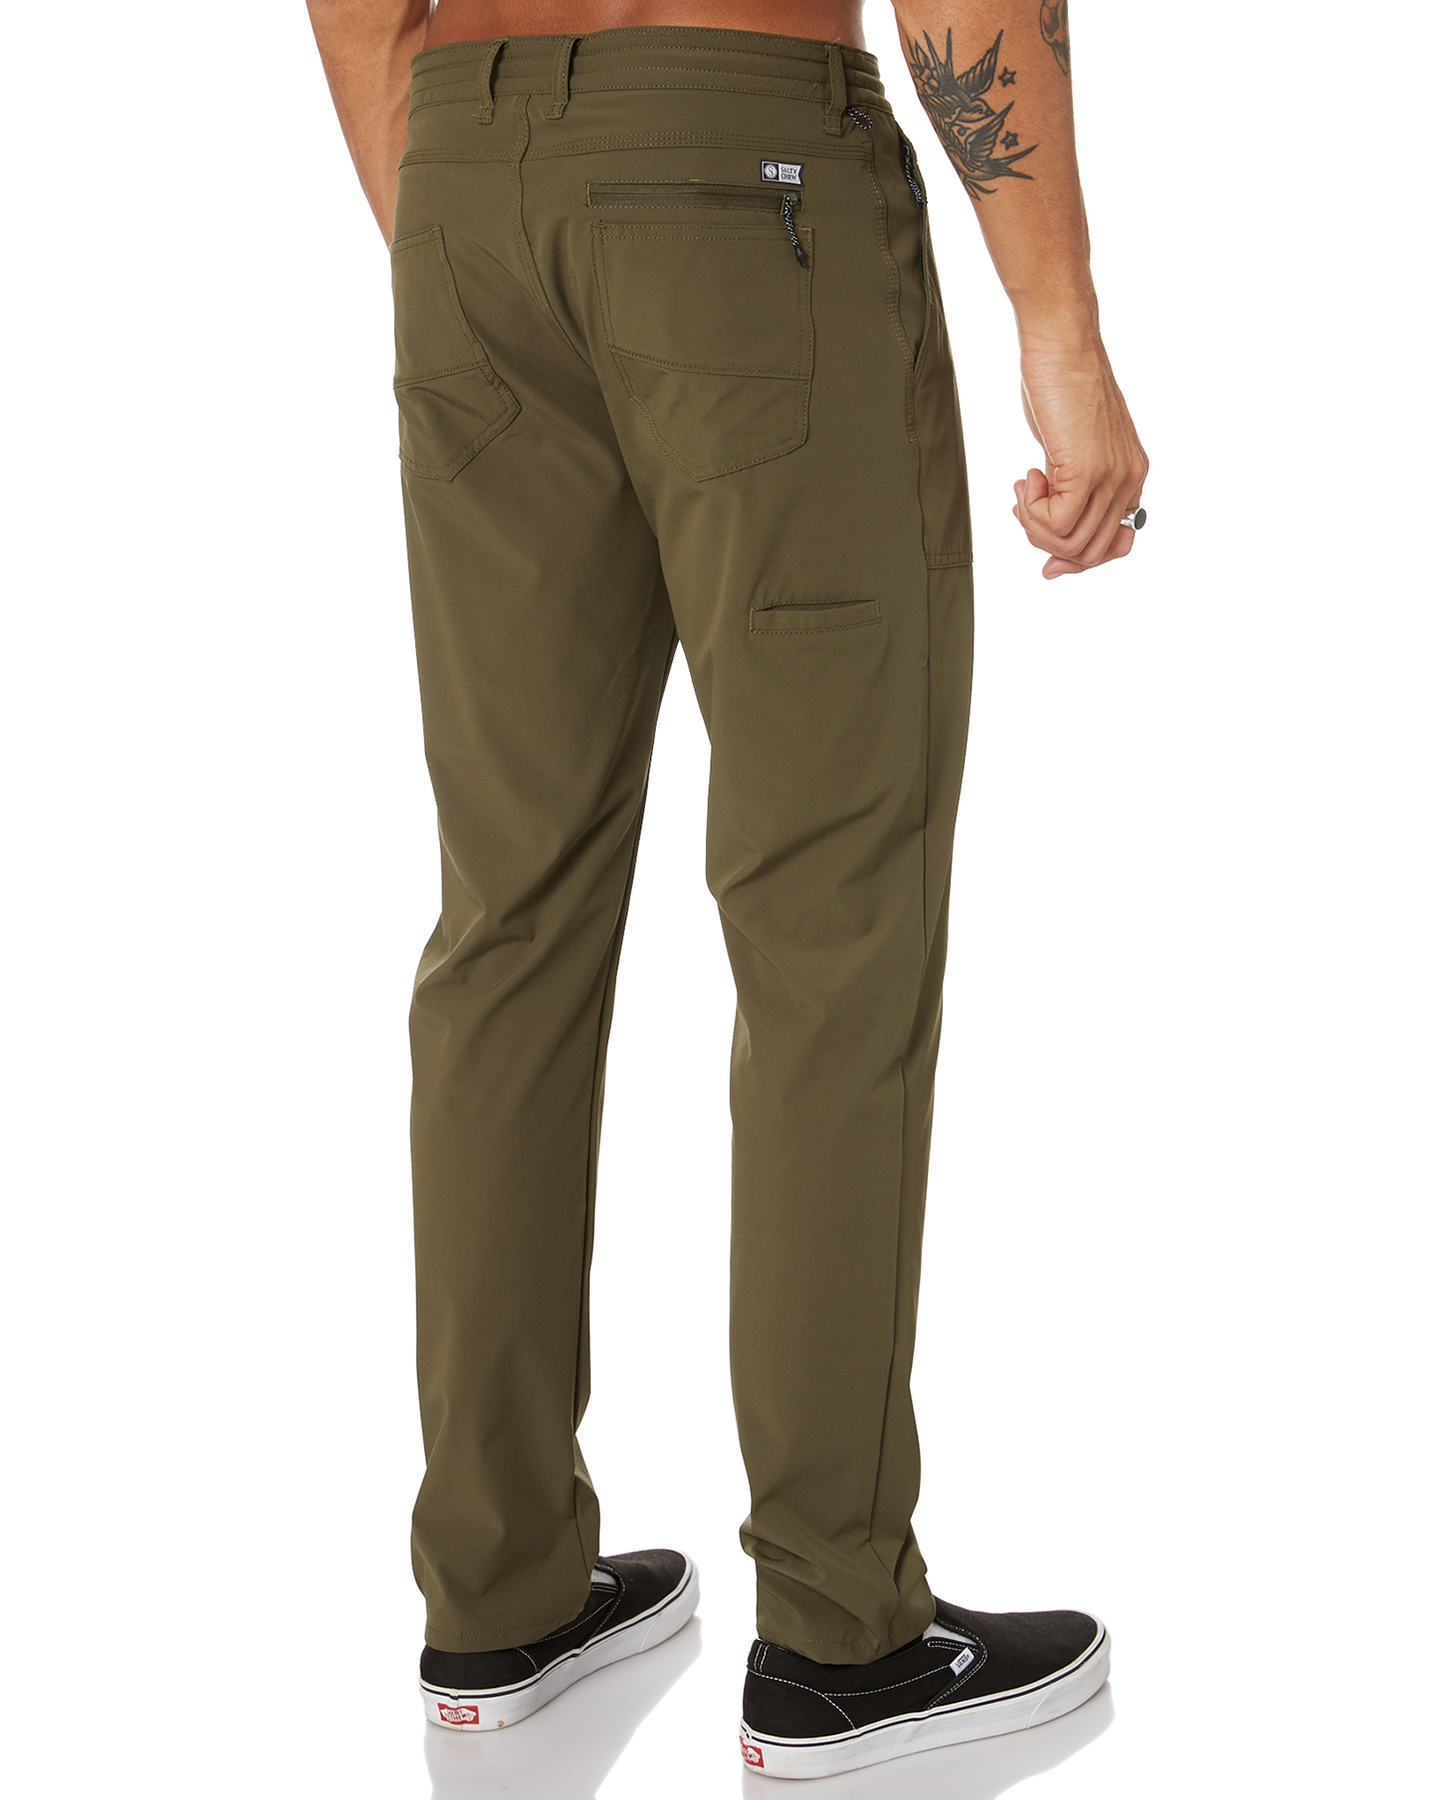 Salty Crew Breakline Mens Technical Fishing Pant - Military | SurfStitch